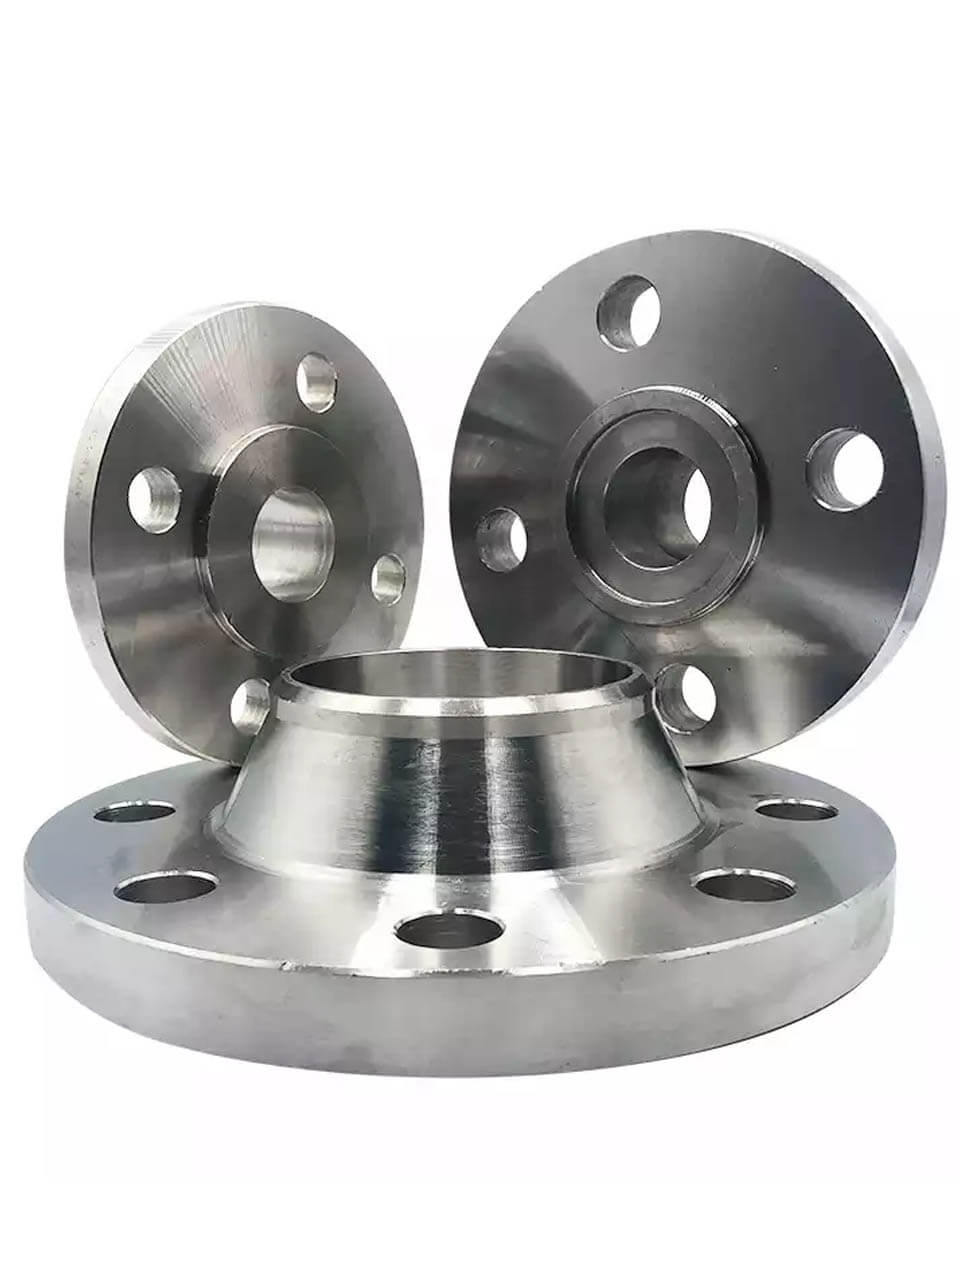  SS 446 Orifice Flanges Exporters